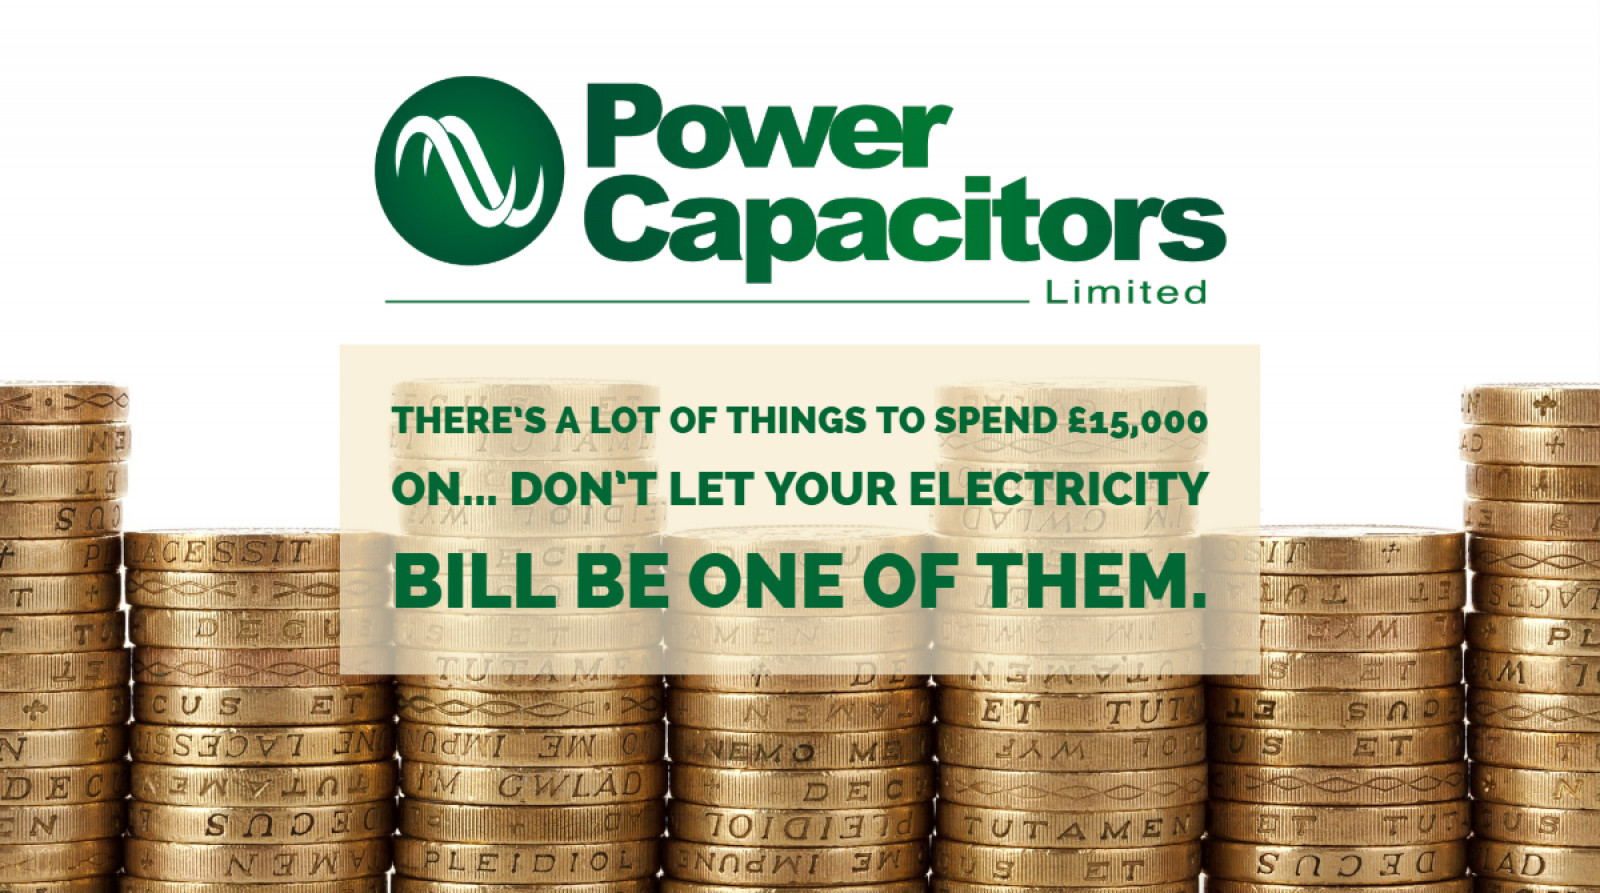 Are you spending £15k a year on electricity?